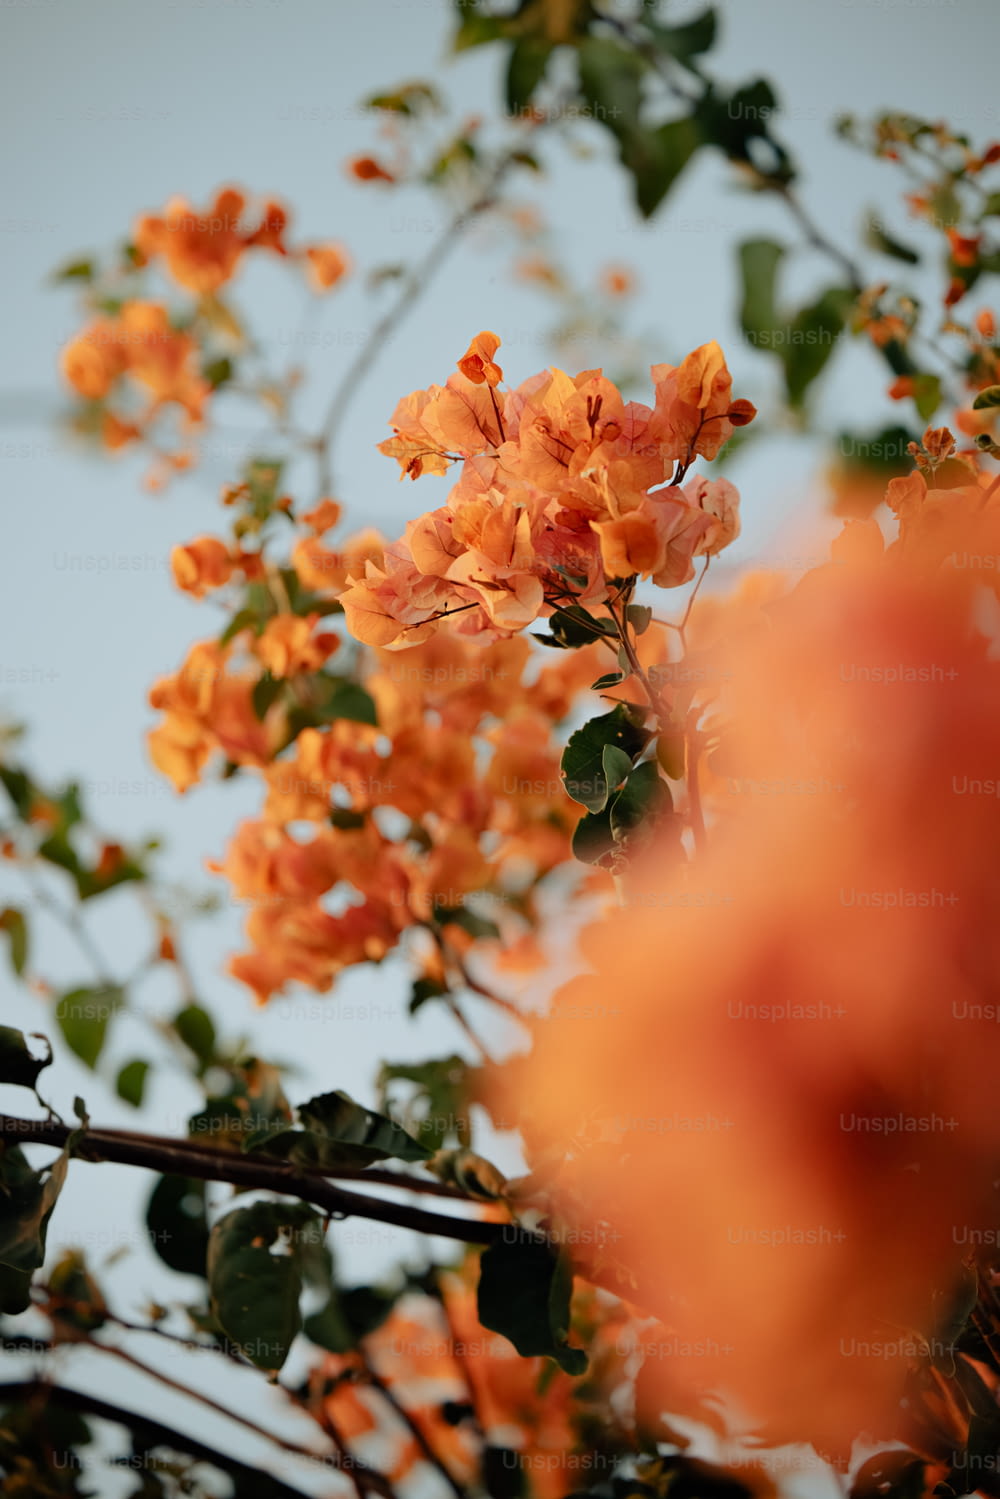 a tree with orange flowers and green leaves